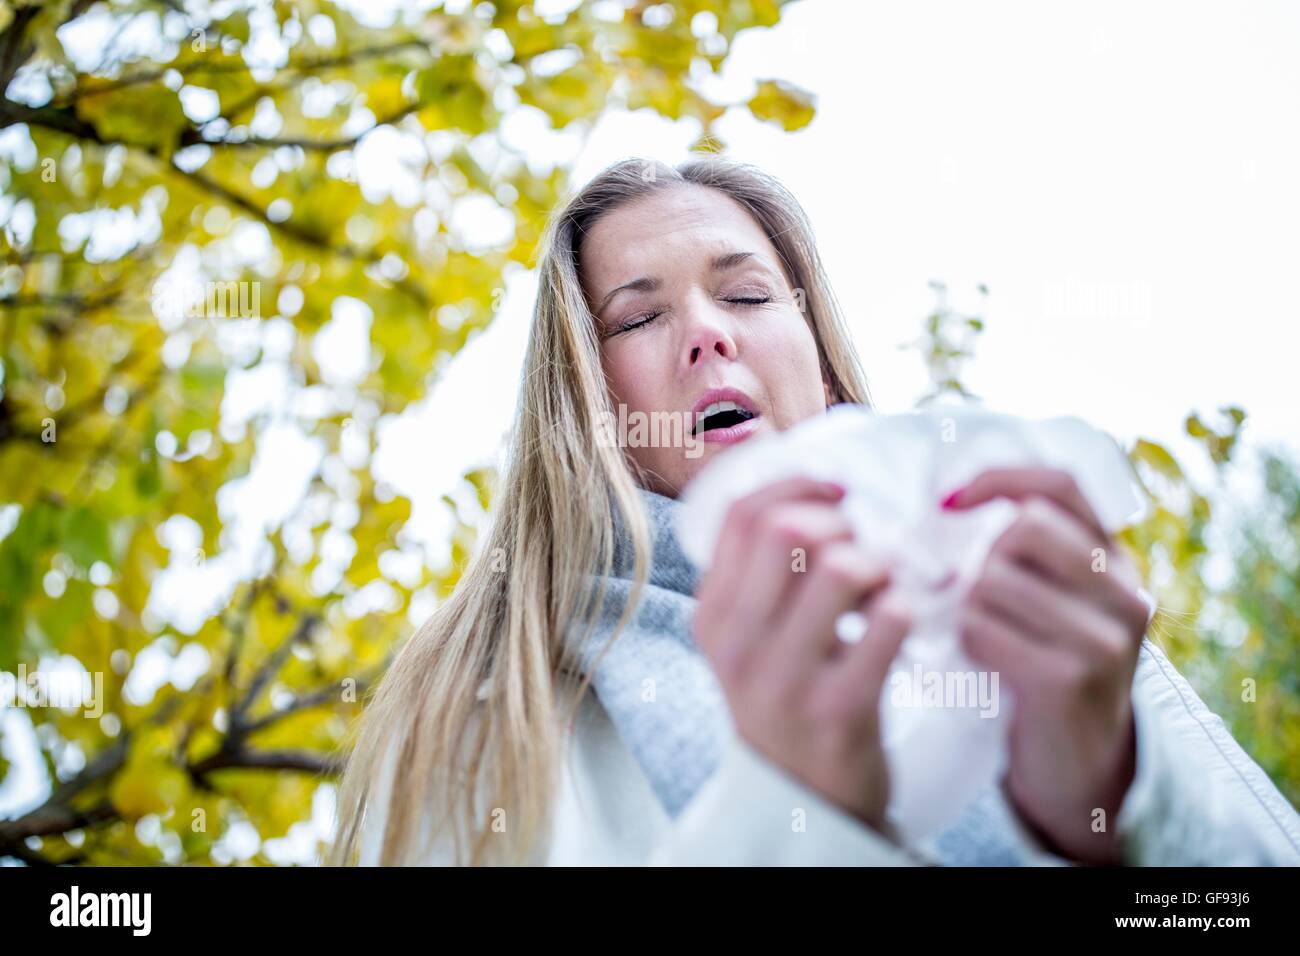 MODEL RELEASED. Young woman about to sneeze, eyes closed. Stock Photo